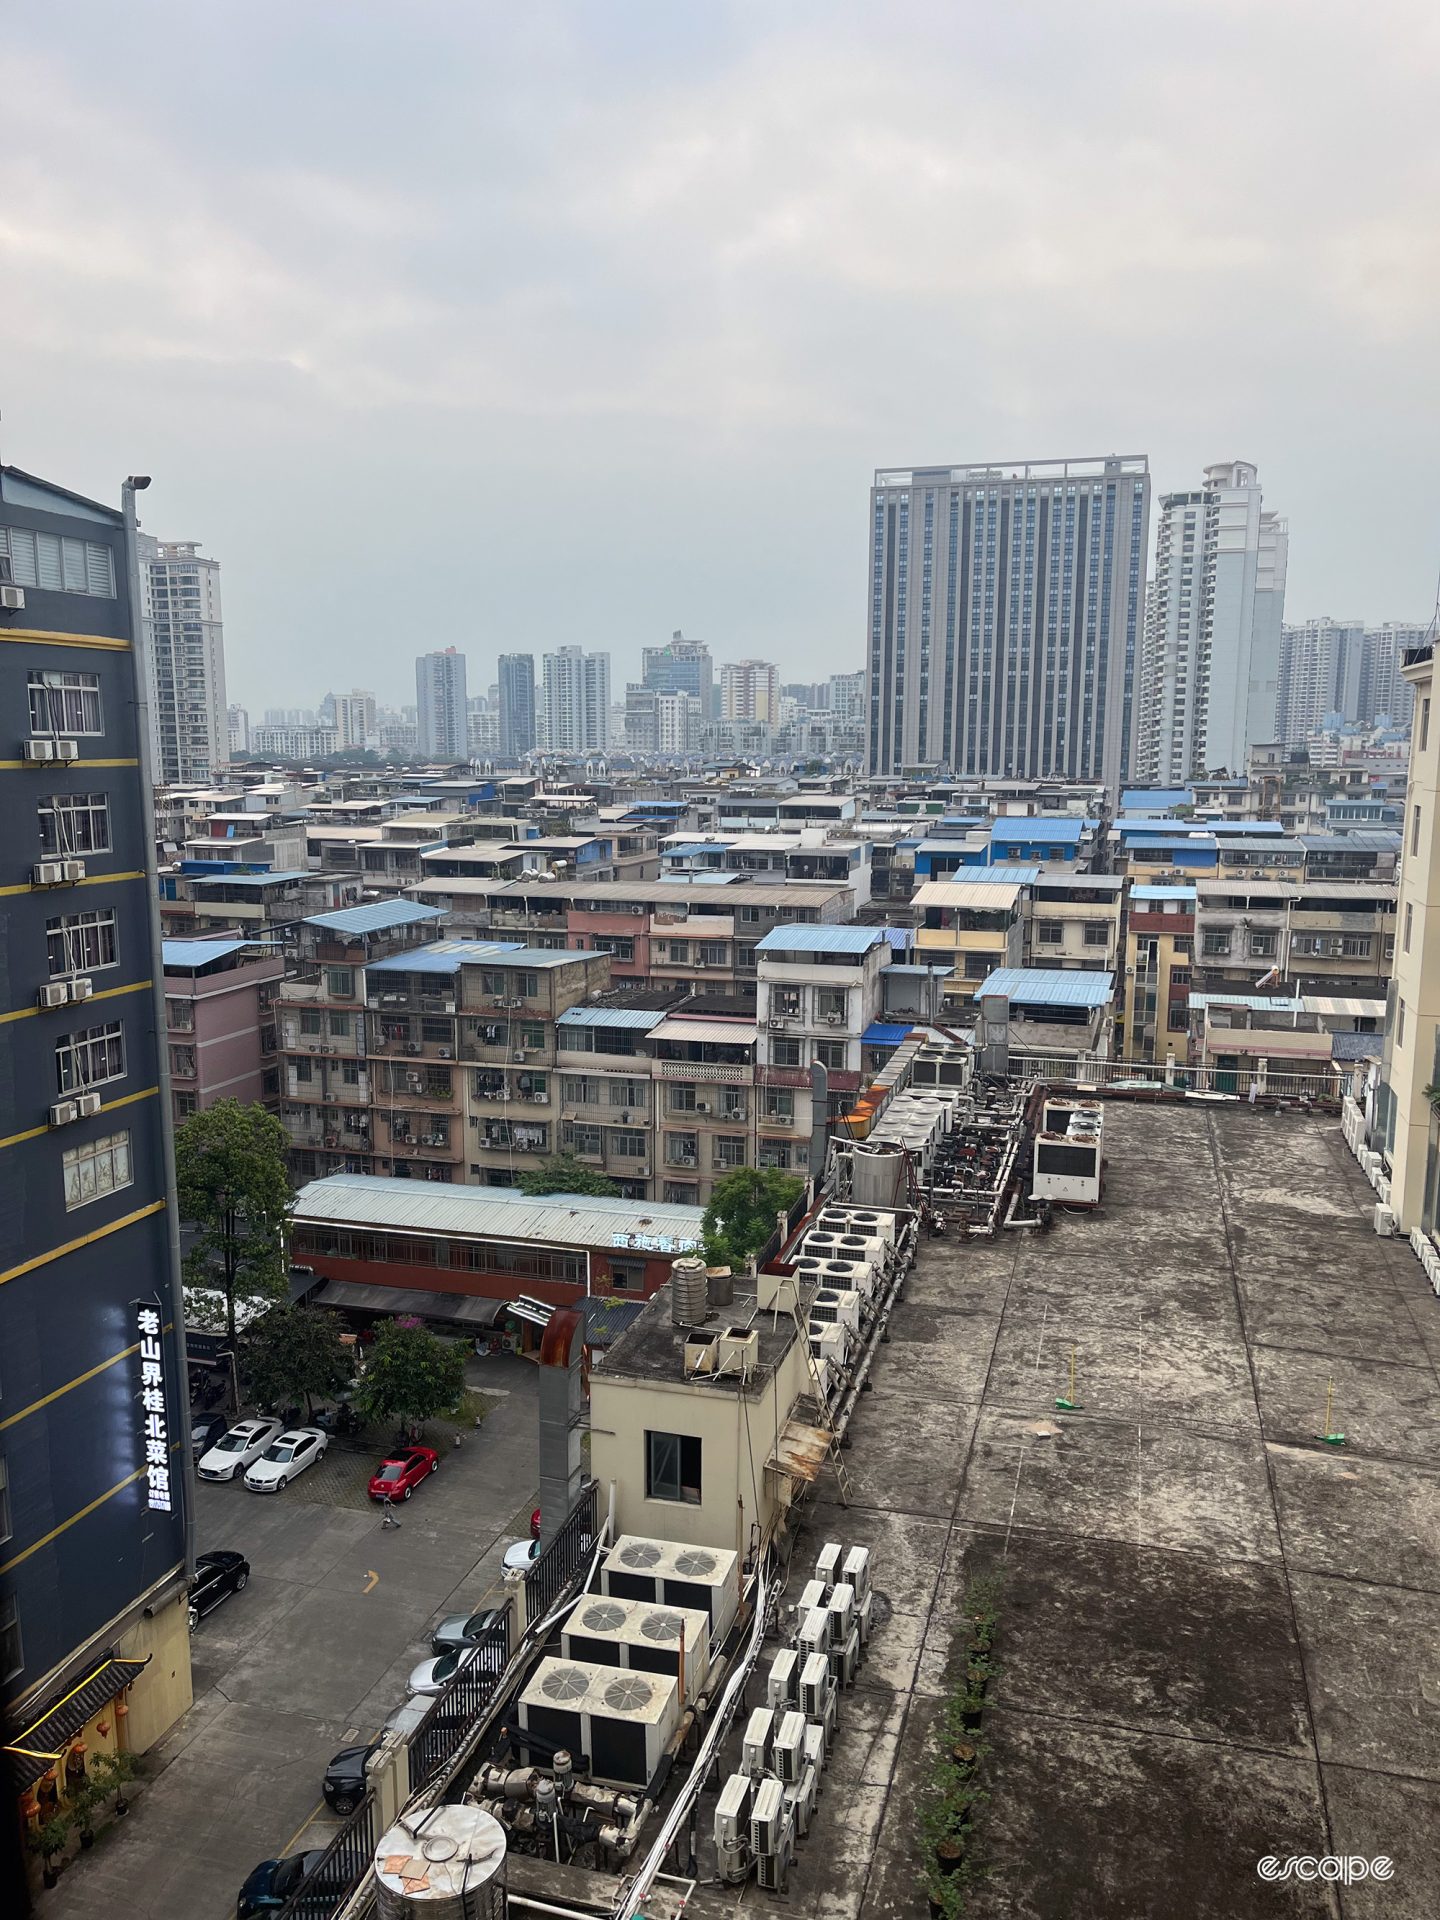 Nanning rooftops seen from a tall window against a hazy grey sky.